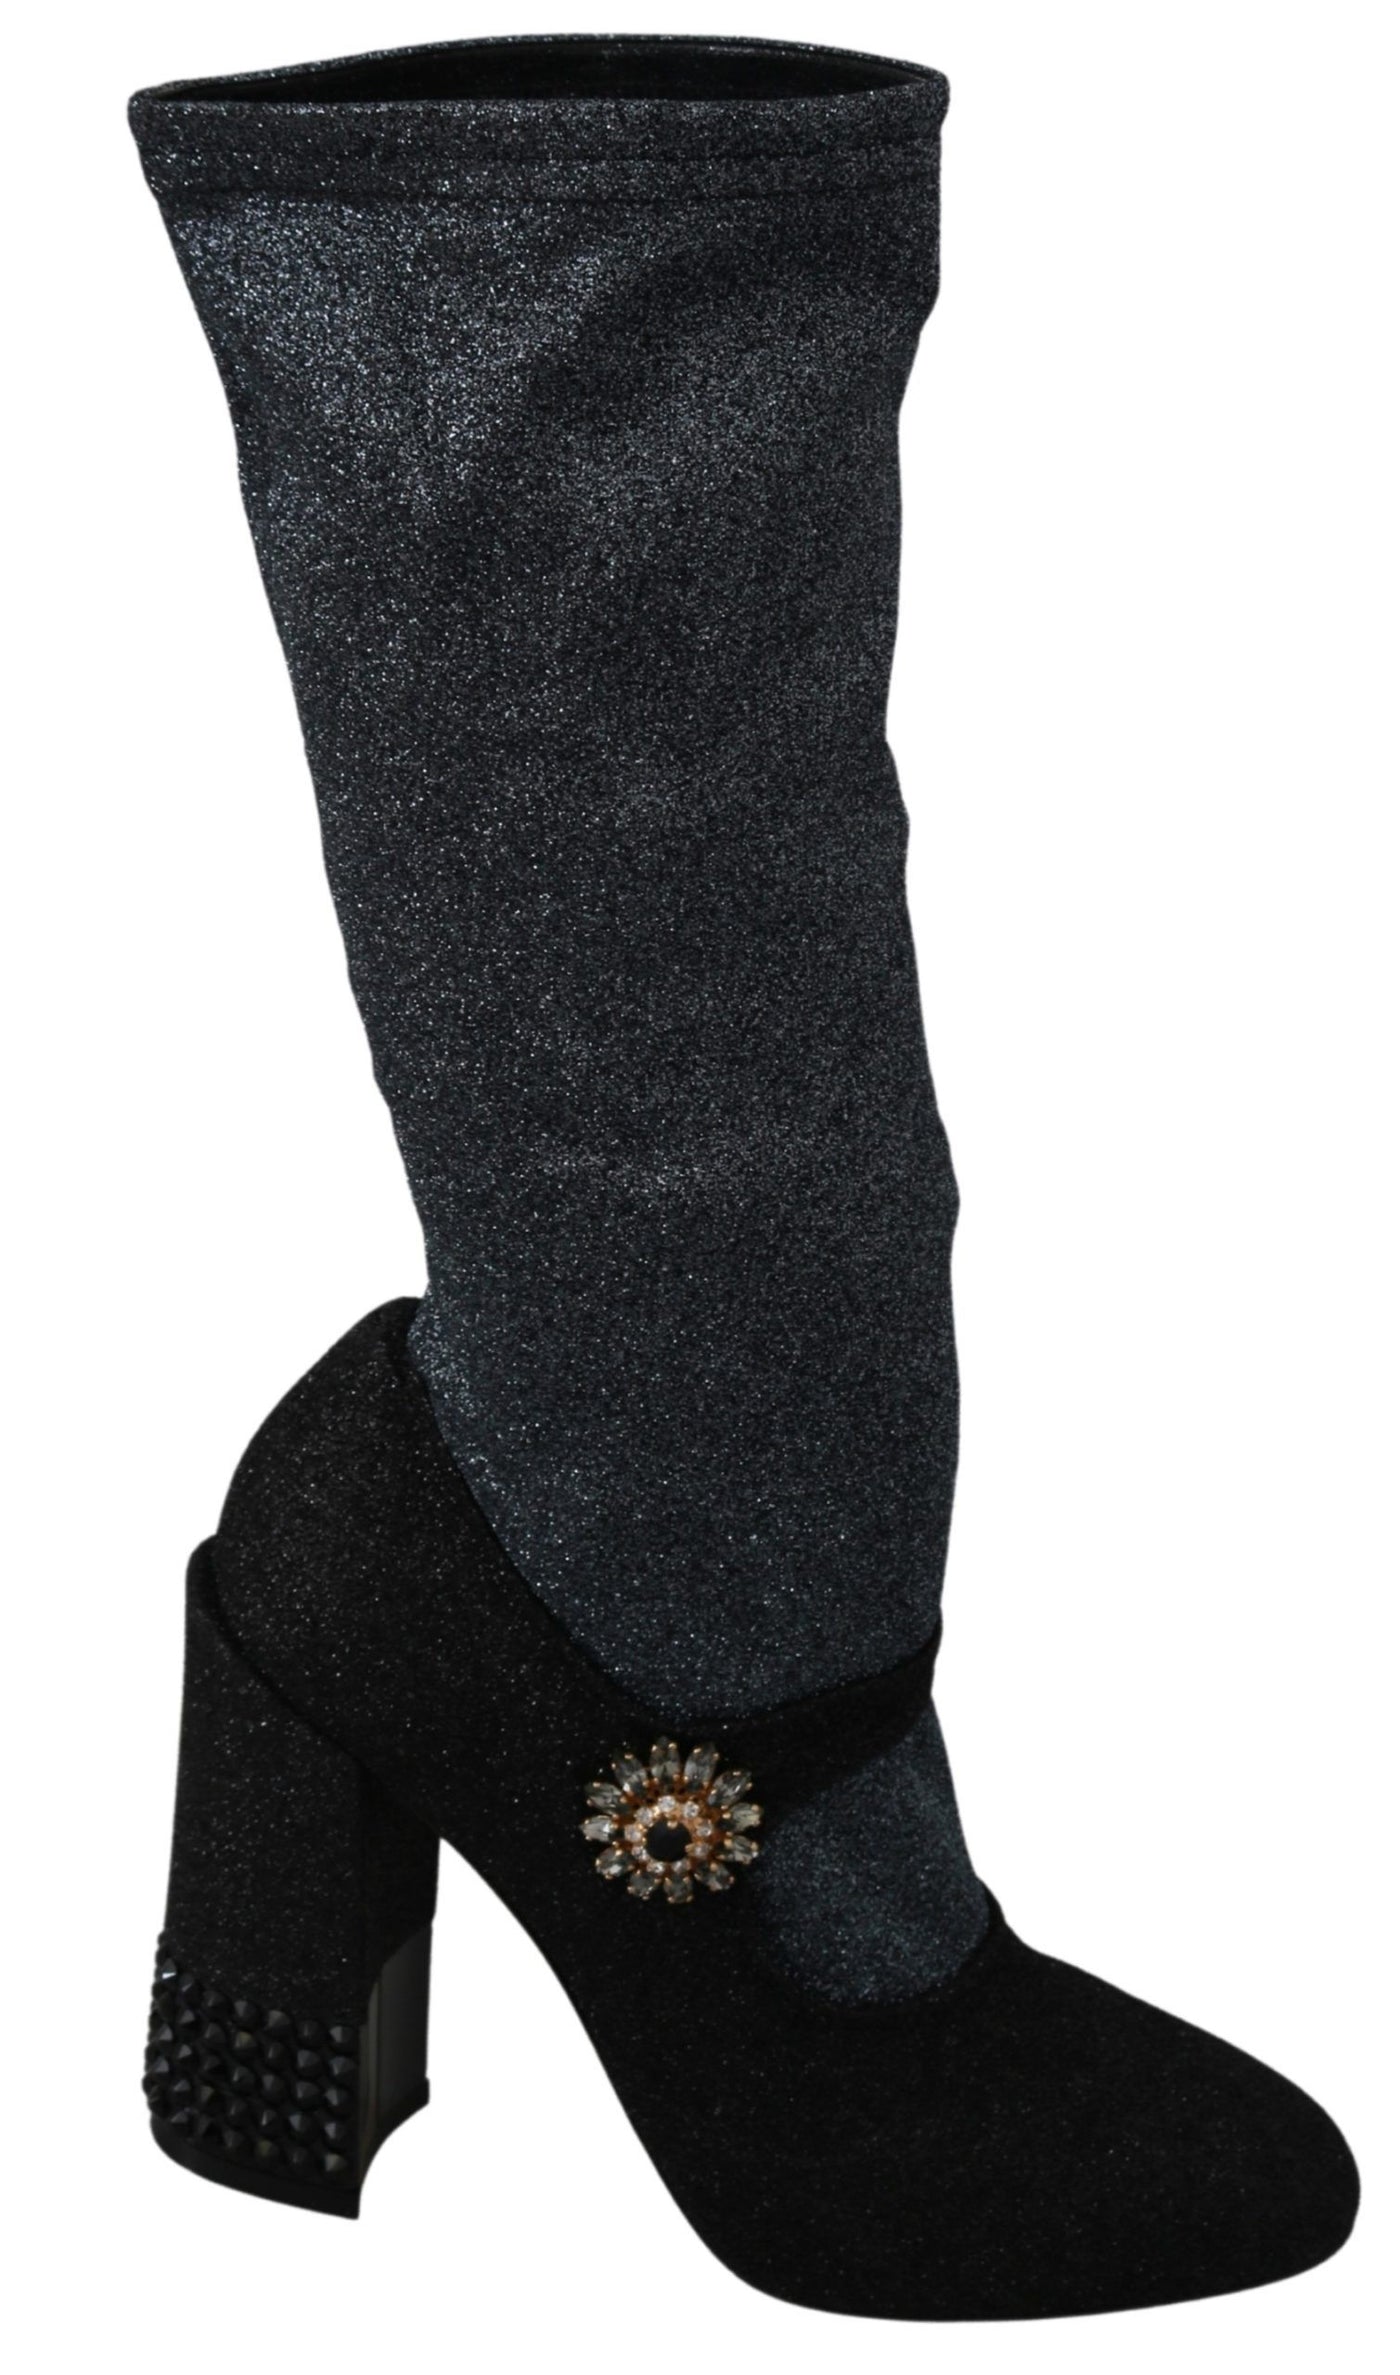 Dolce & Gabbana Black Crystal Mary Janes Booties Shoes